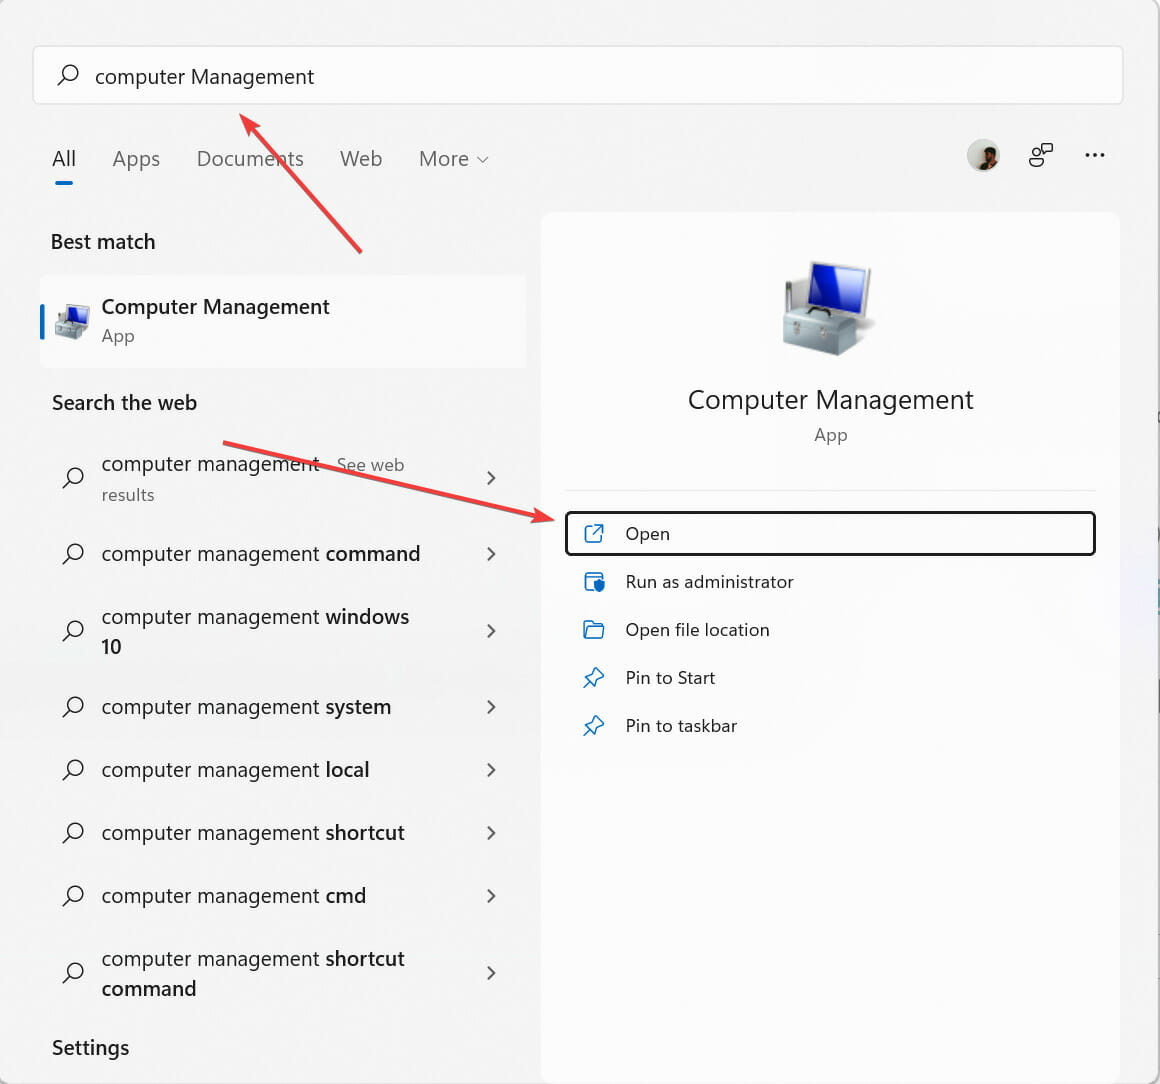 Opening Computer Management using search